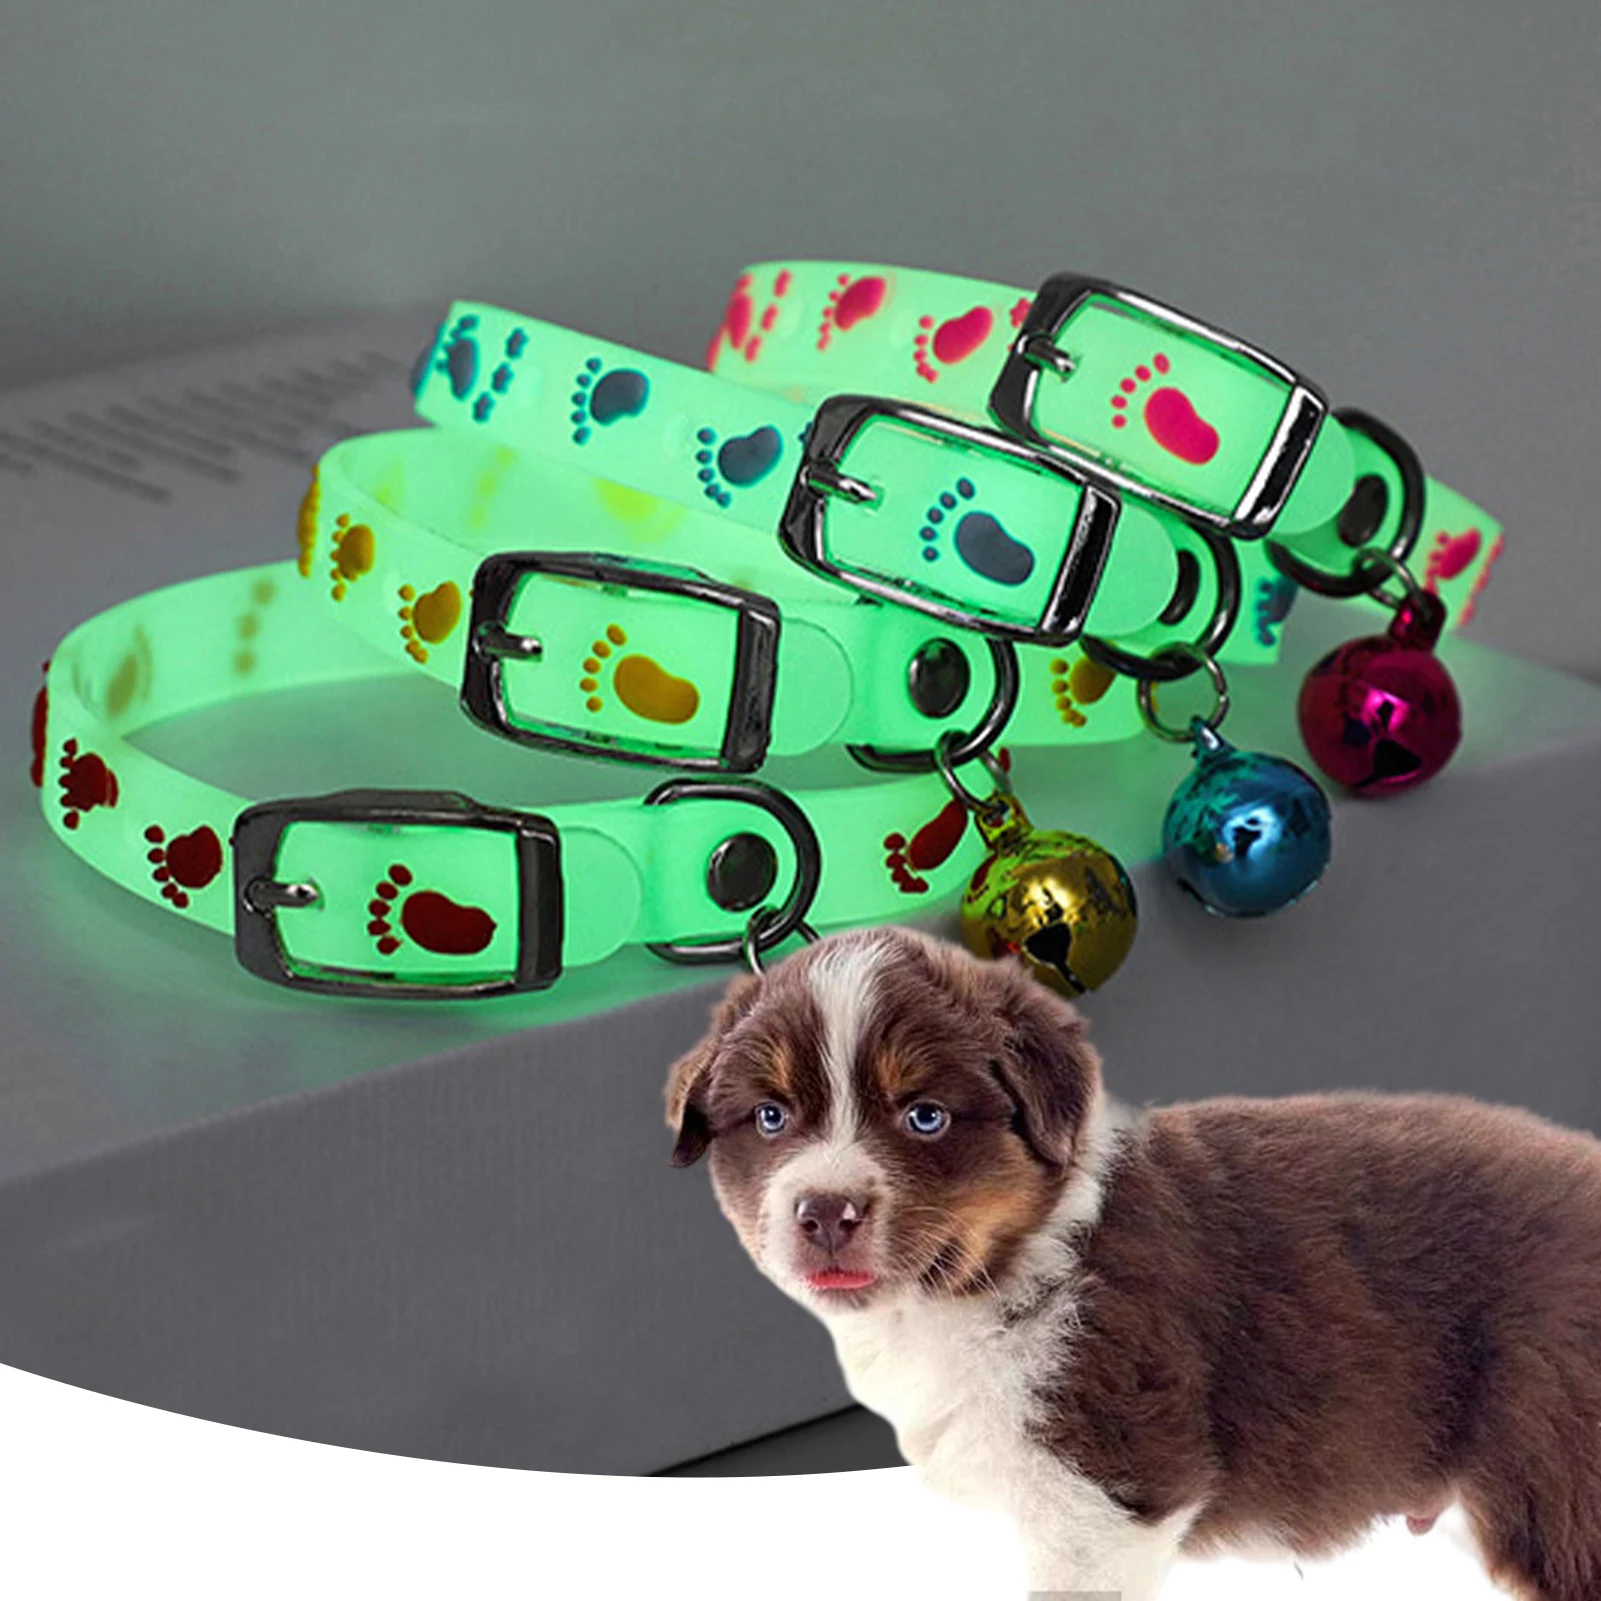 

Pet Glowing Collars with Bells Dog Cats Luminous Collar Light Up at Night Anti-Lost Dog Cat Glowing Necklace Pets Supplies